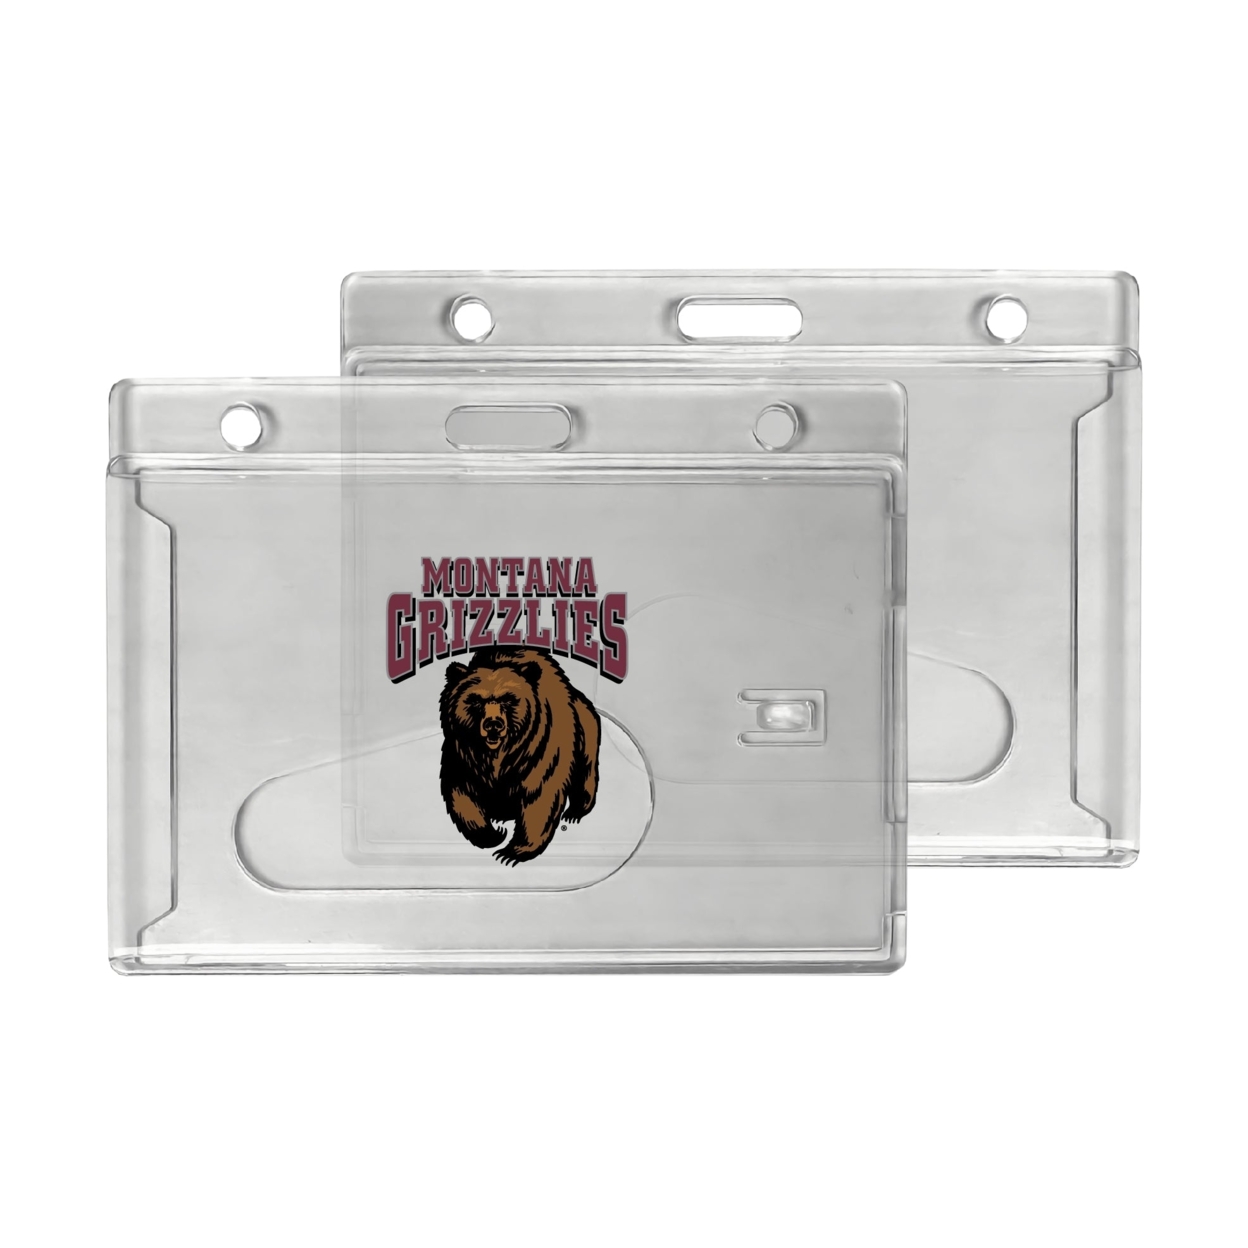 Montana University Clear View ID Holder